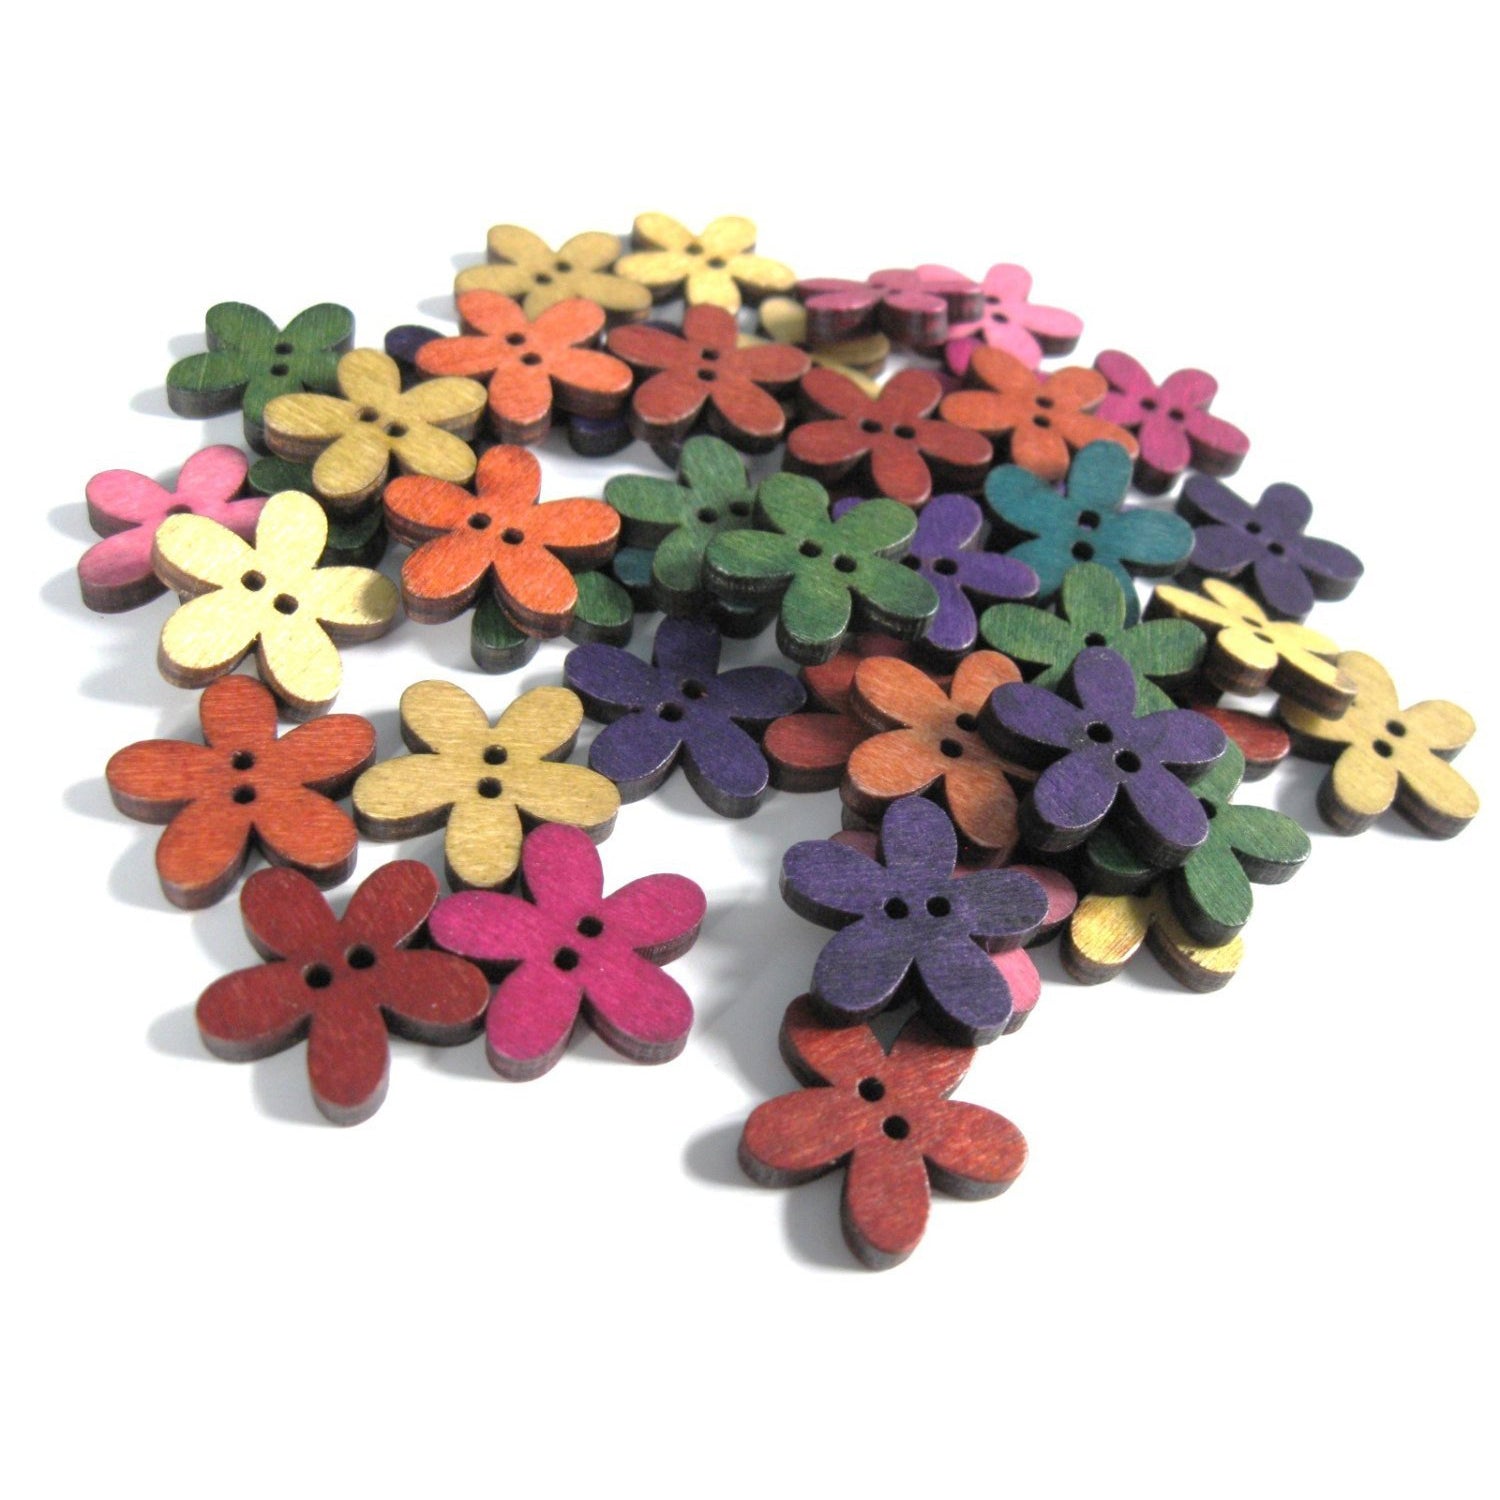 25 Mixed Colors Buttons - Wood sewing buttons 20mm - Flowers shapes